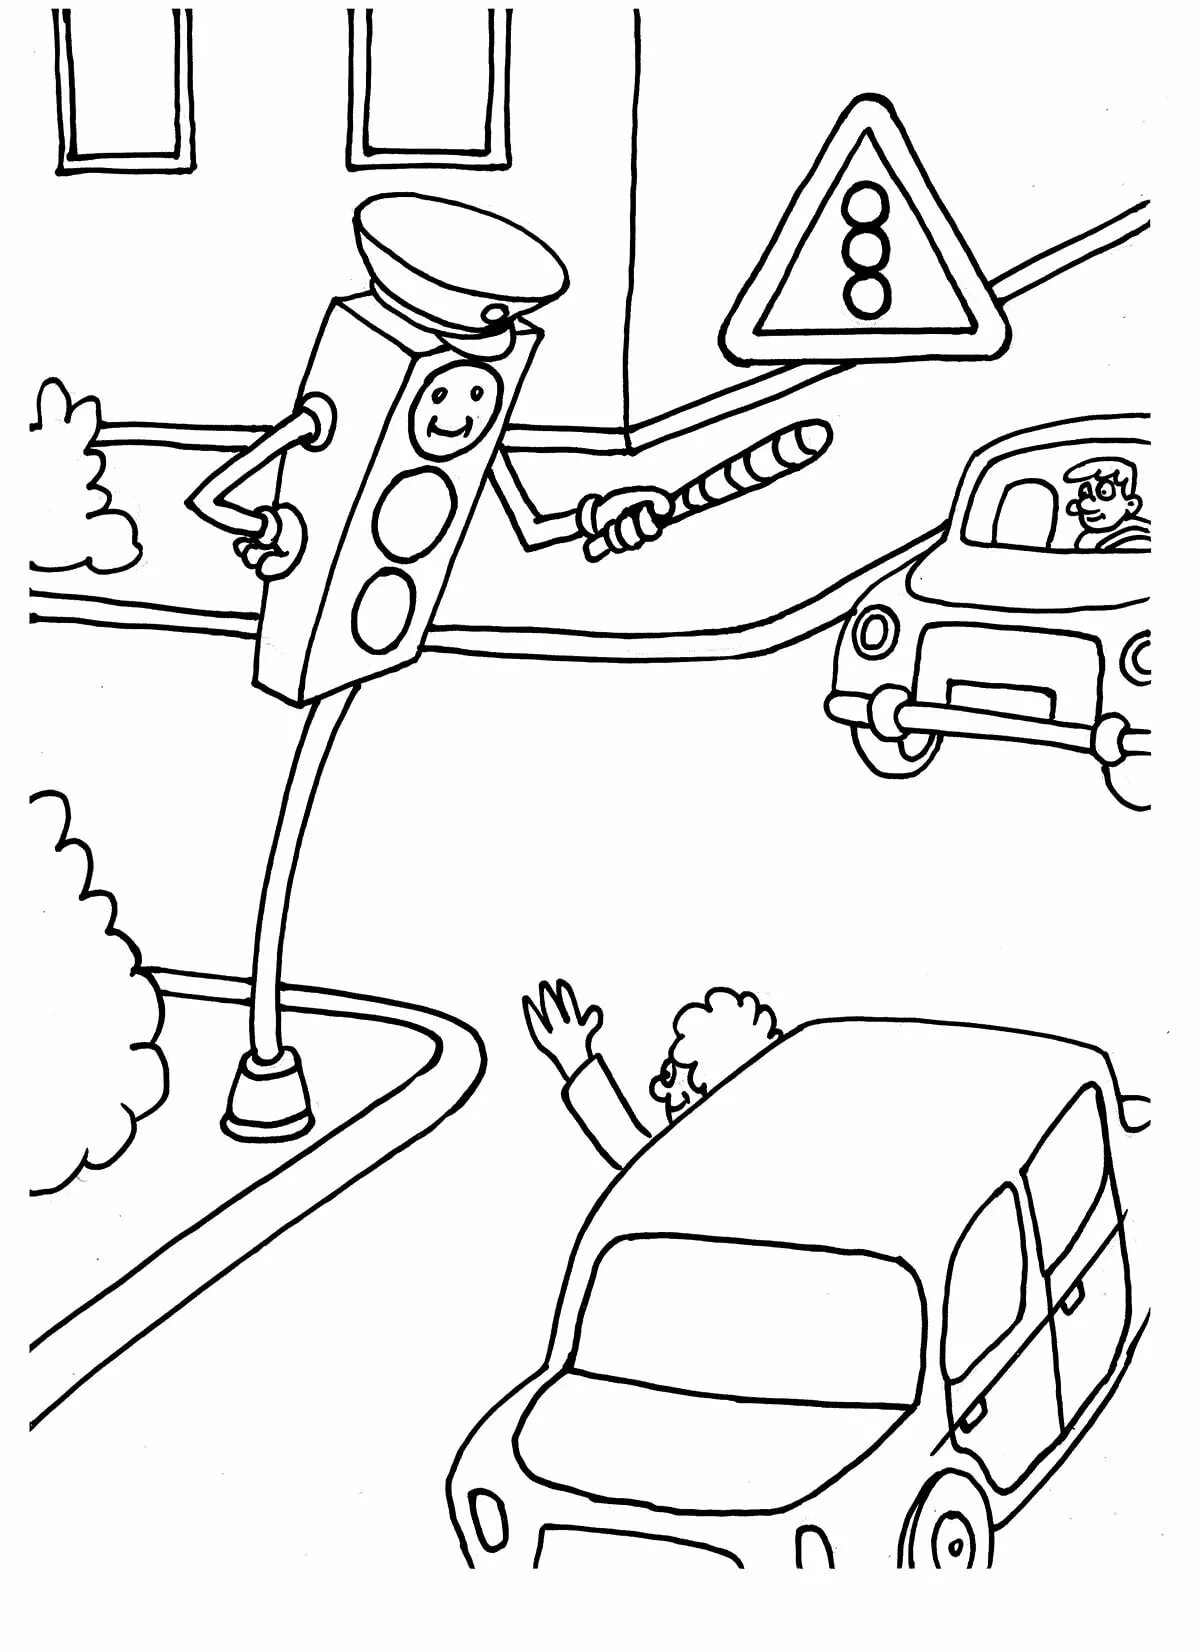 Sweet safety sign coloring page